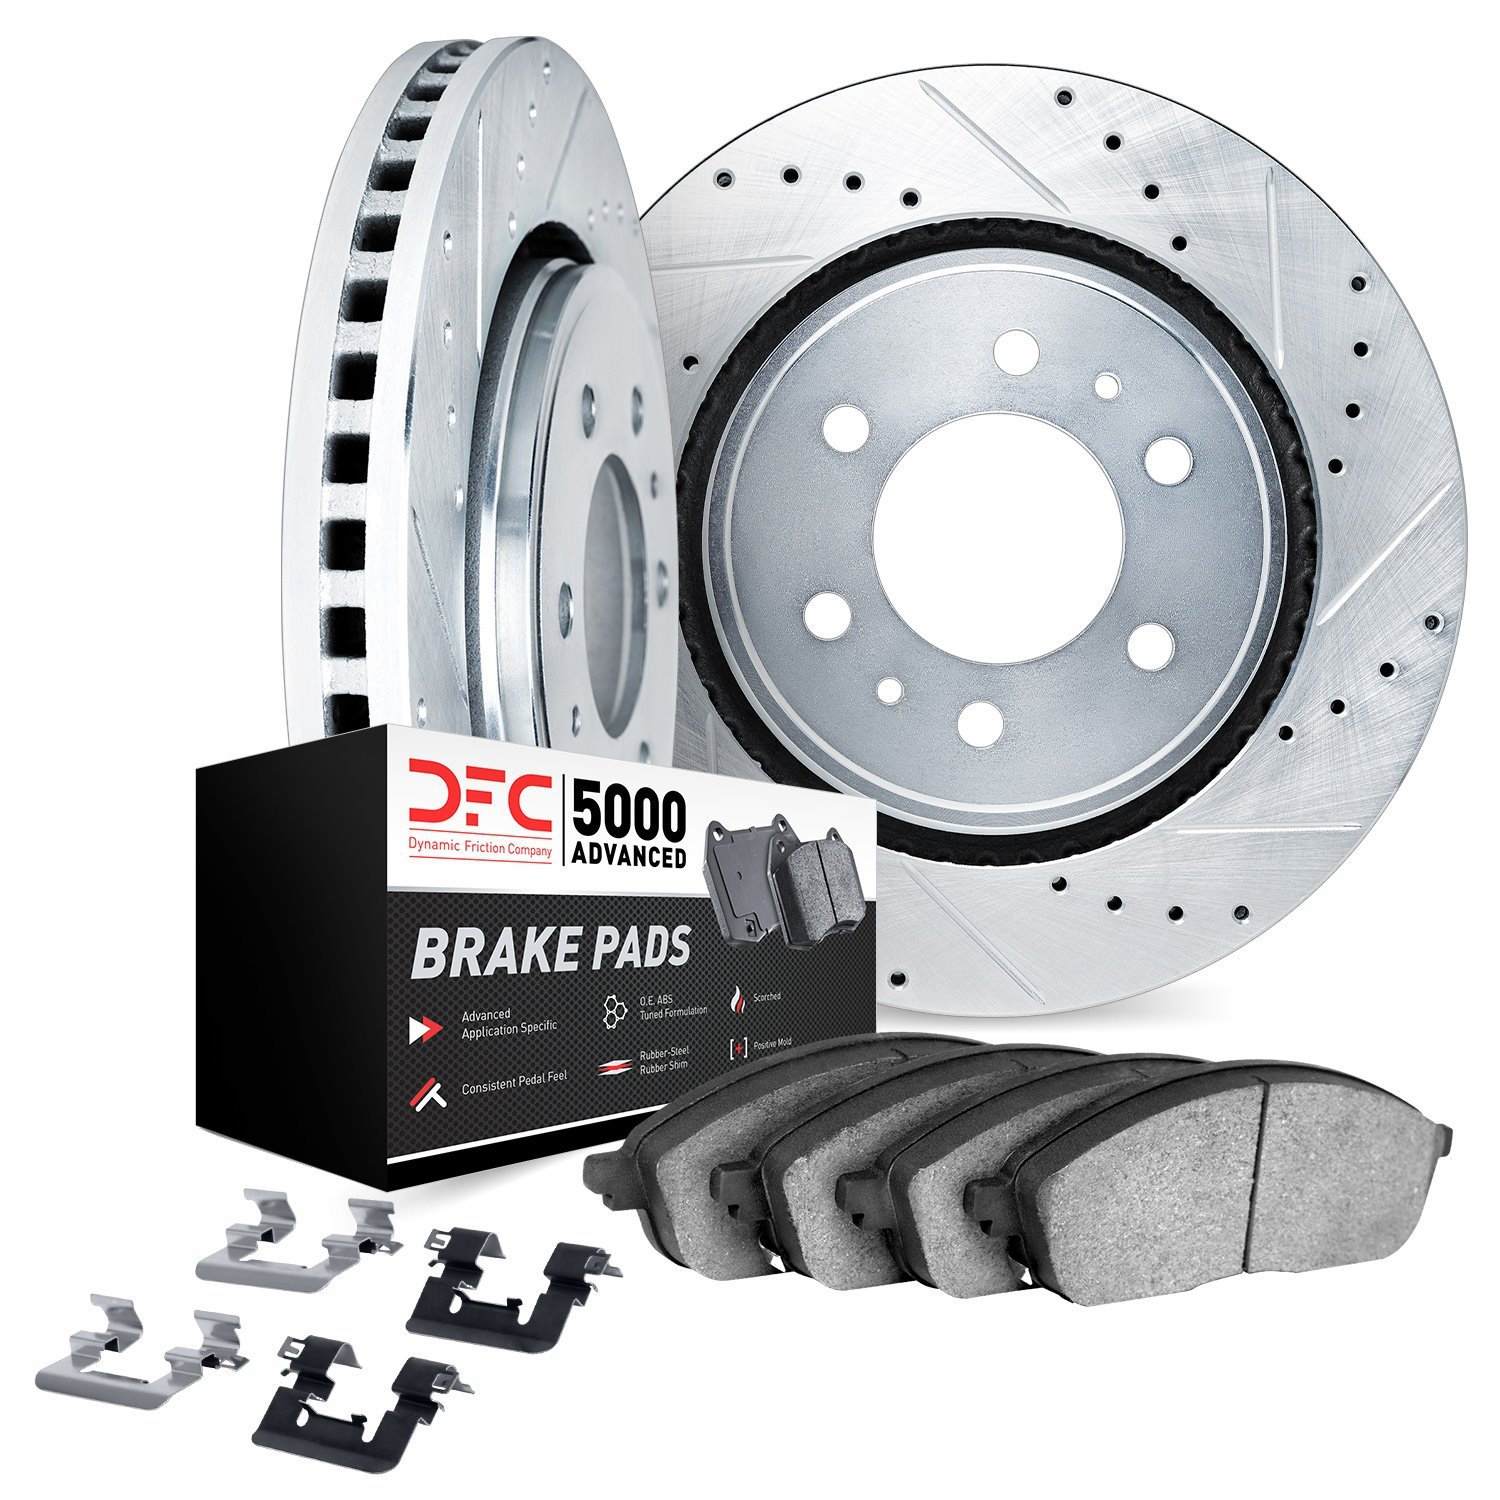 7512-54210 Drilled/Slotted Brake Rotors w/5000 Advanced Brake Pads Kit & Hardware [Silver], Fits Select Ford/Lincoln/Mercury/Maz